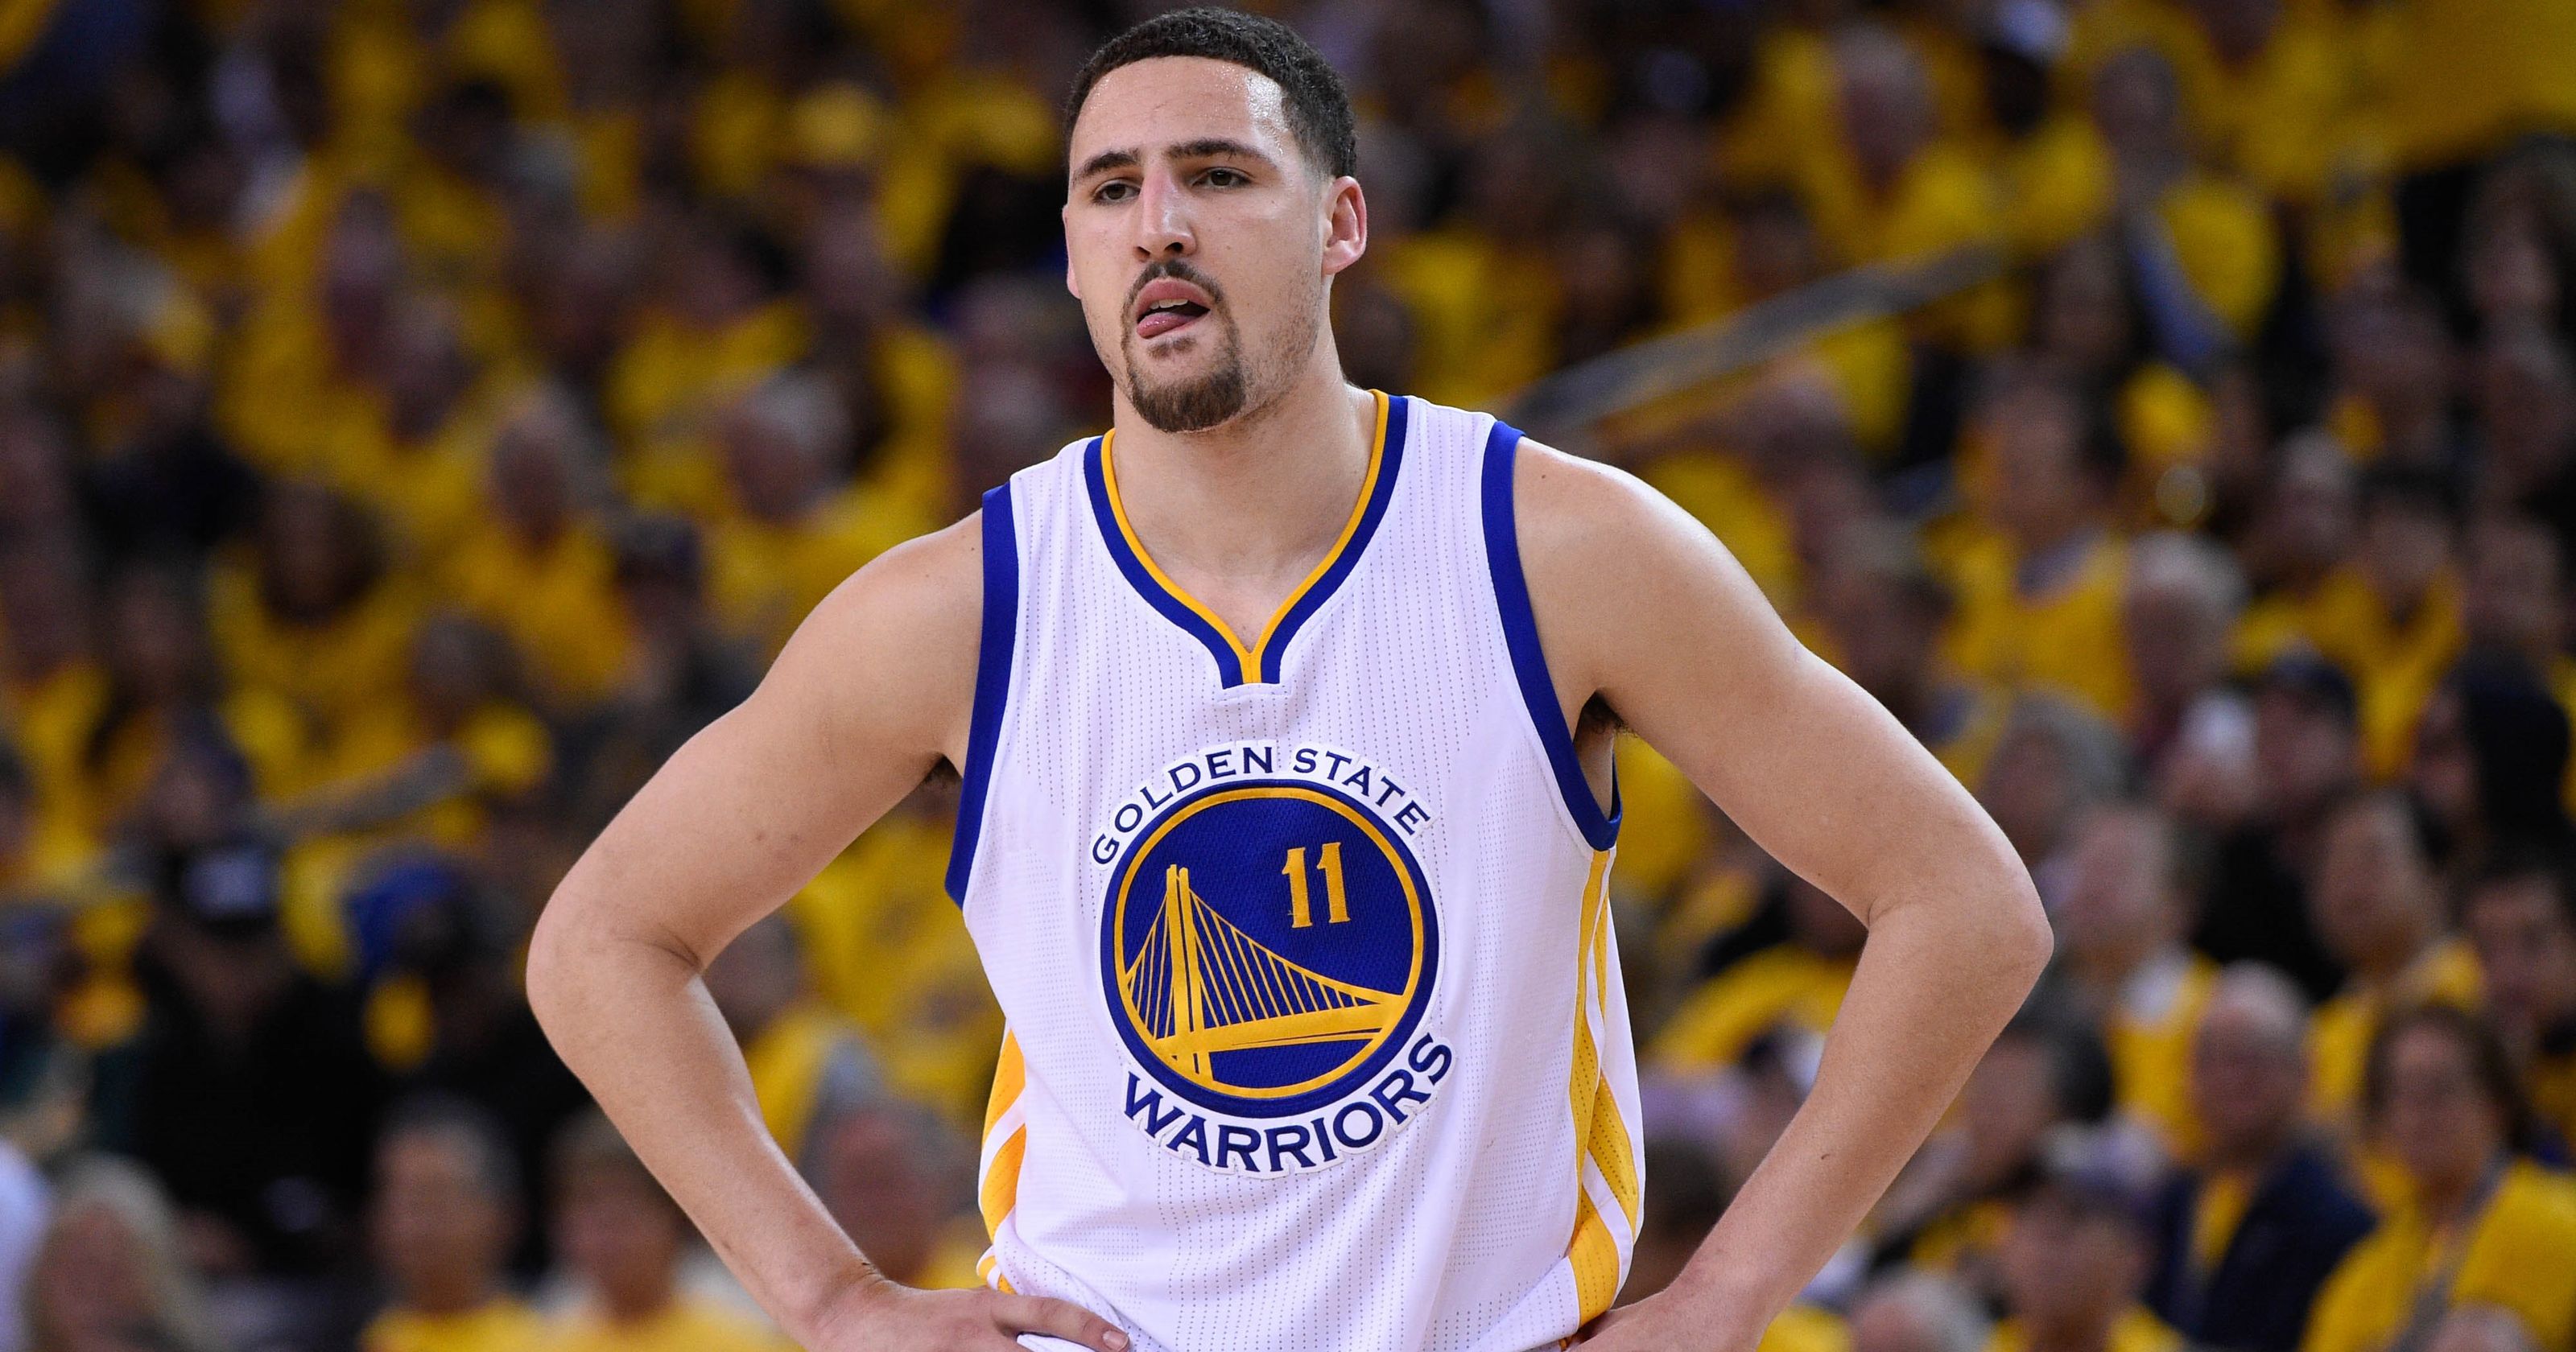 KLAY THOMPSON BLOWS UP FOR “60 POINTS” ON THE NBA MONDAY NIGHT FEATURED FAN FAVORITE GAME, WHICH FEATURED THE WARRIORS WINNING AGAINST THE PACERS